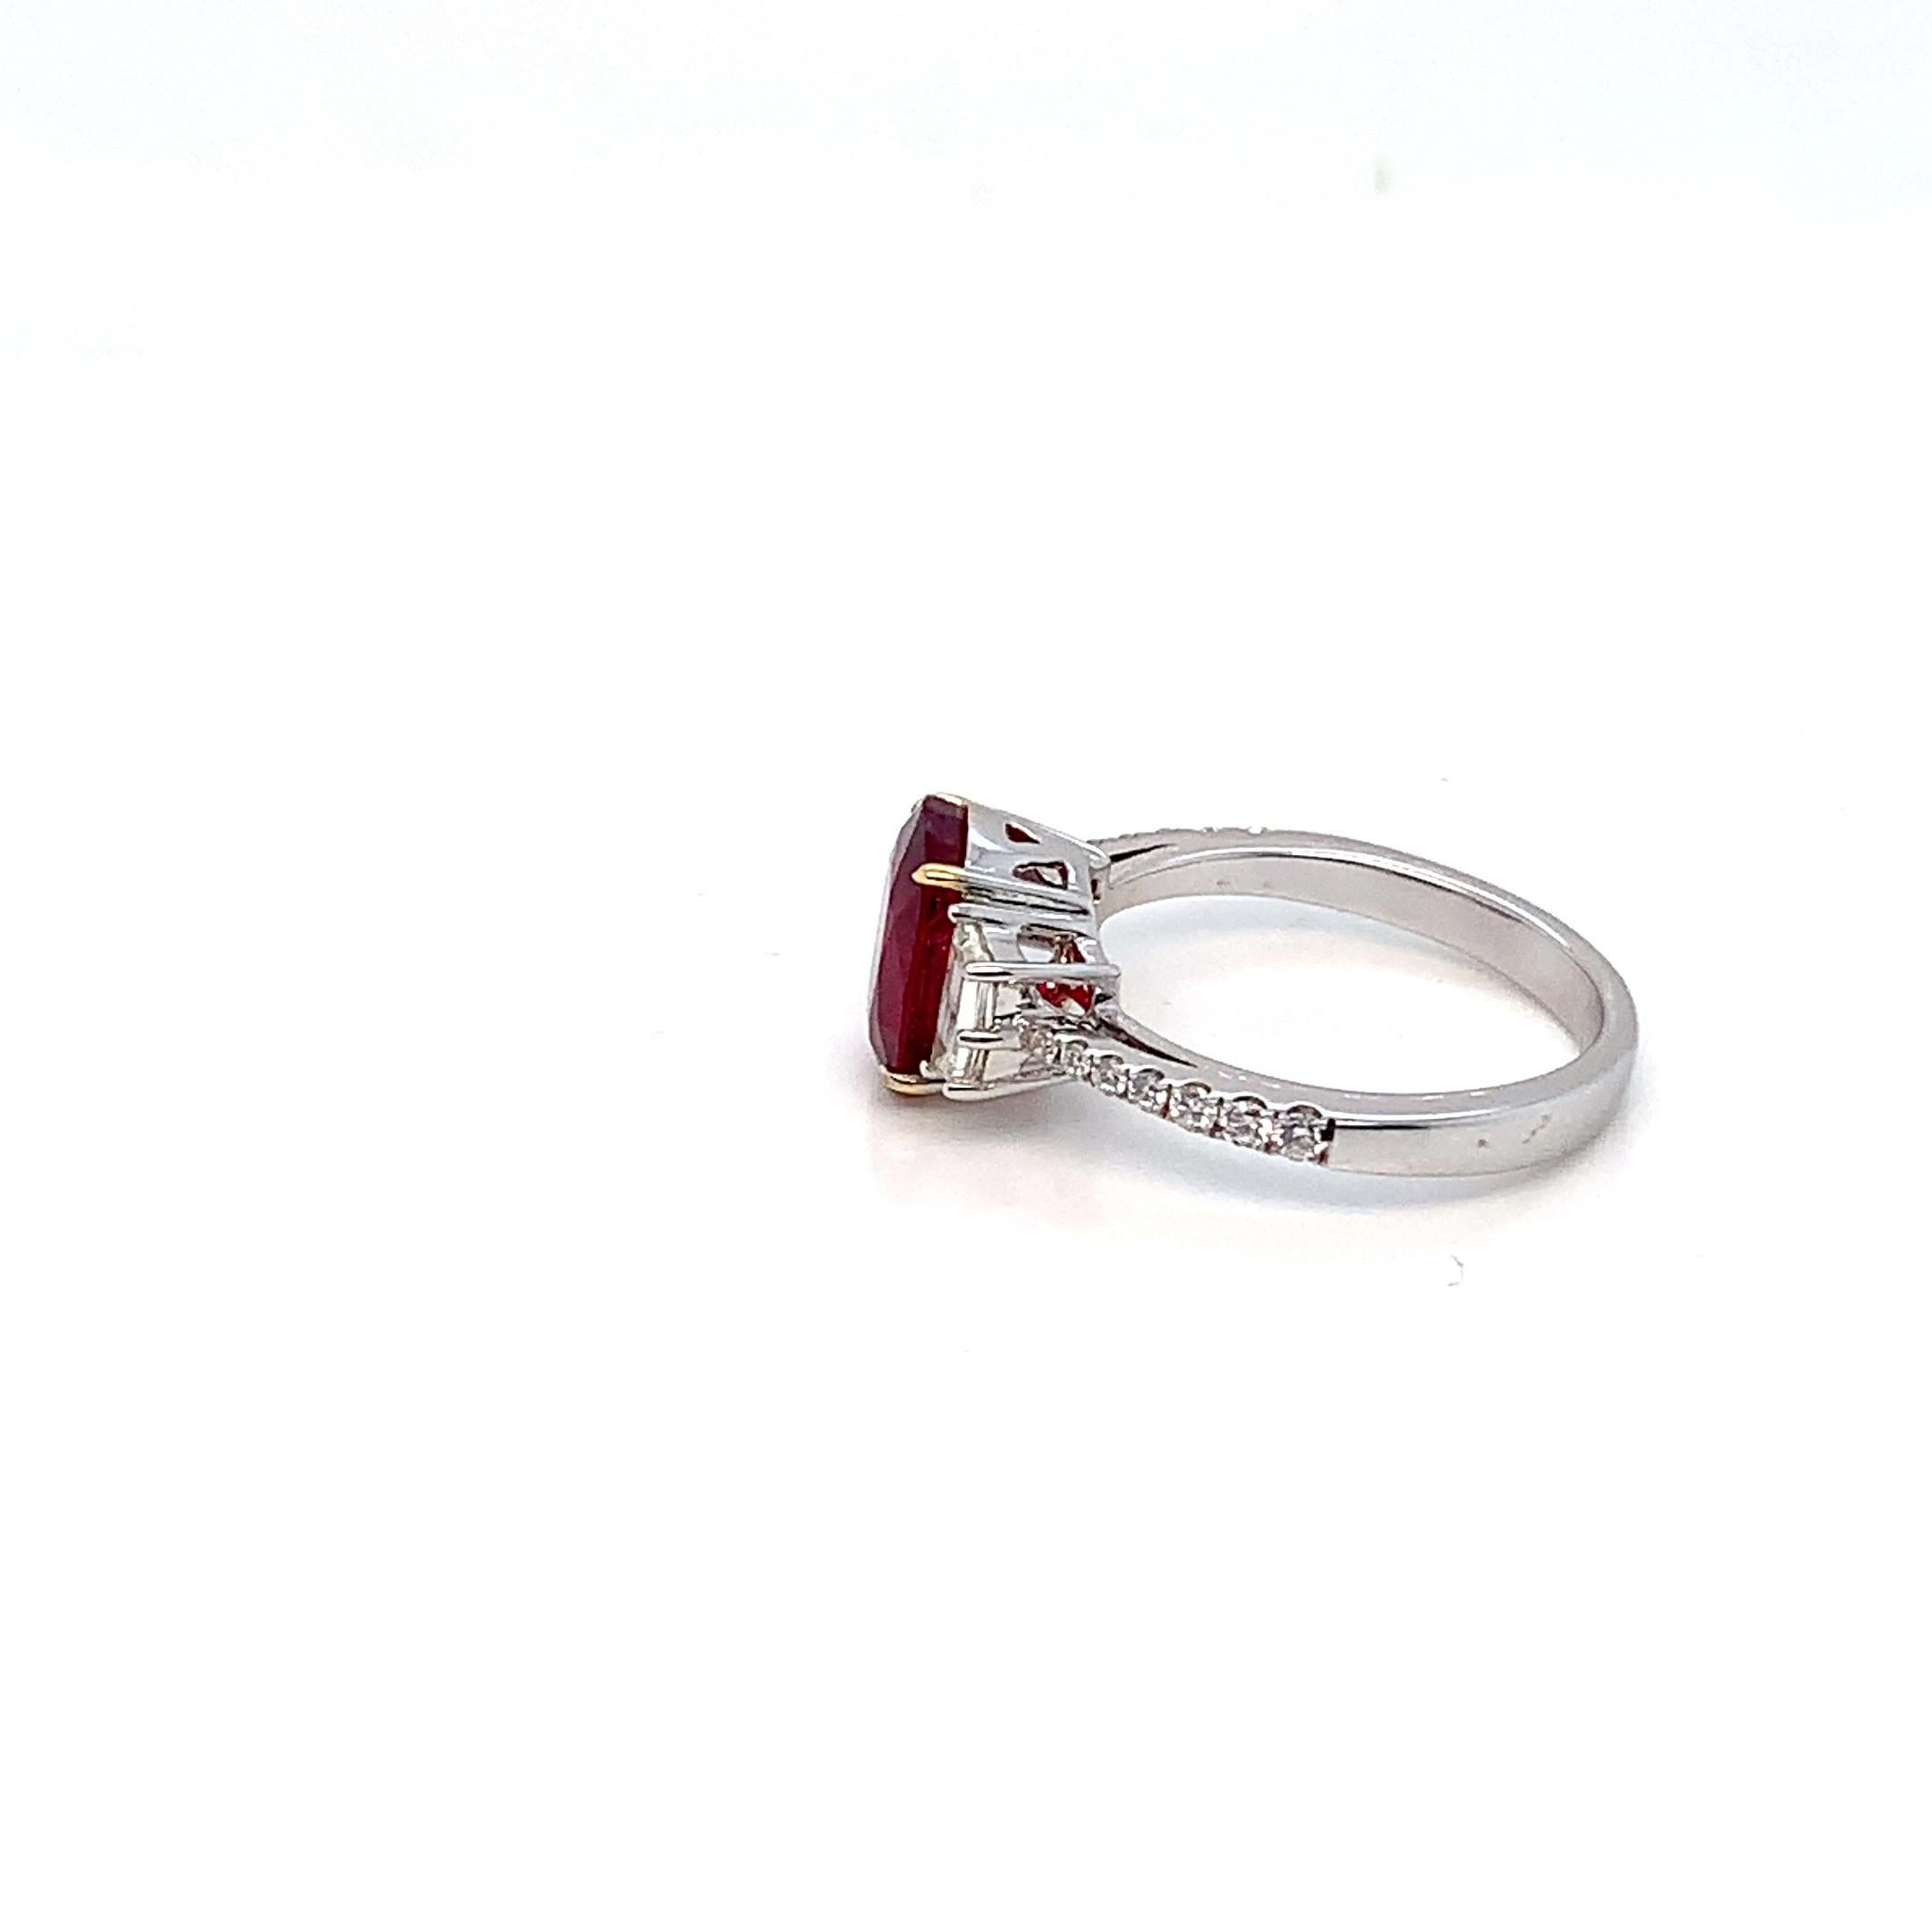 Presenting a timeless declaration of love, Rewa Jewelry brings you an enchanting ruby and diamond engagement ring inspired by classic styles—a masterpiece that captures the essence of enduring romance.

At the heart of this symbolic ring lies a